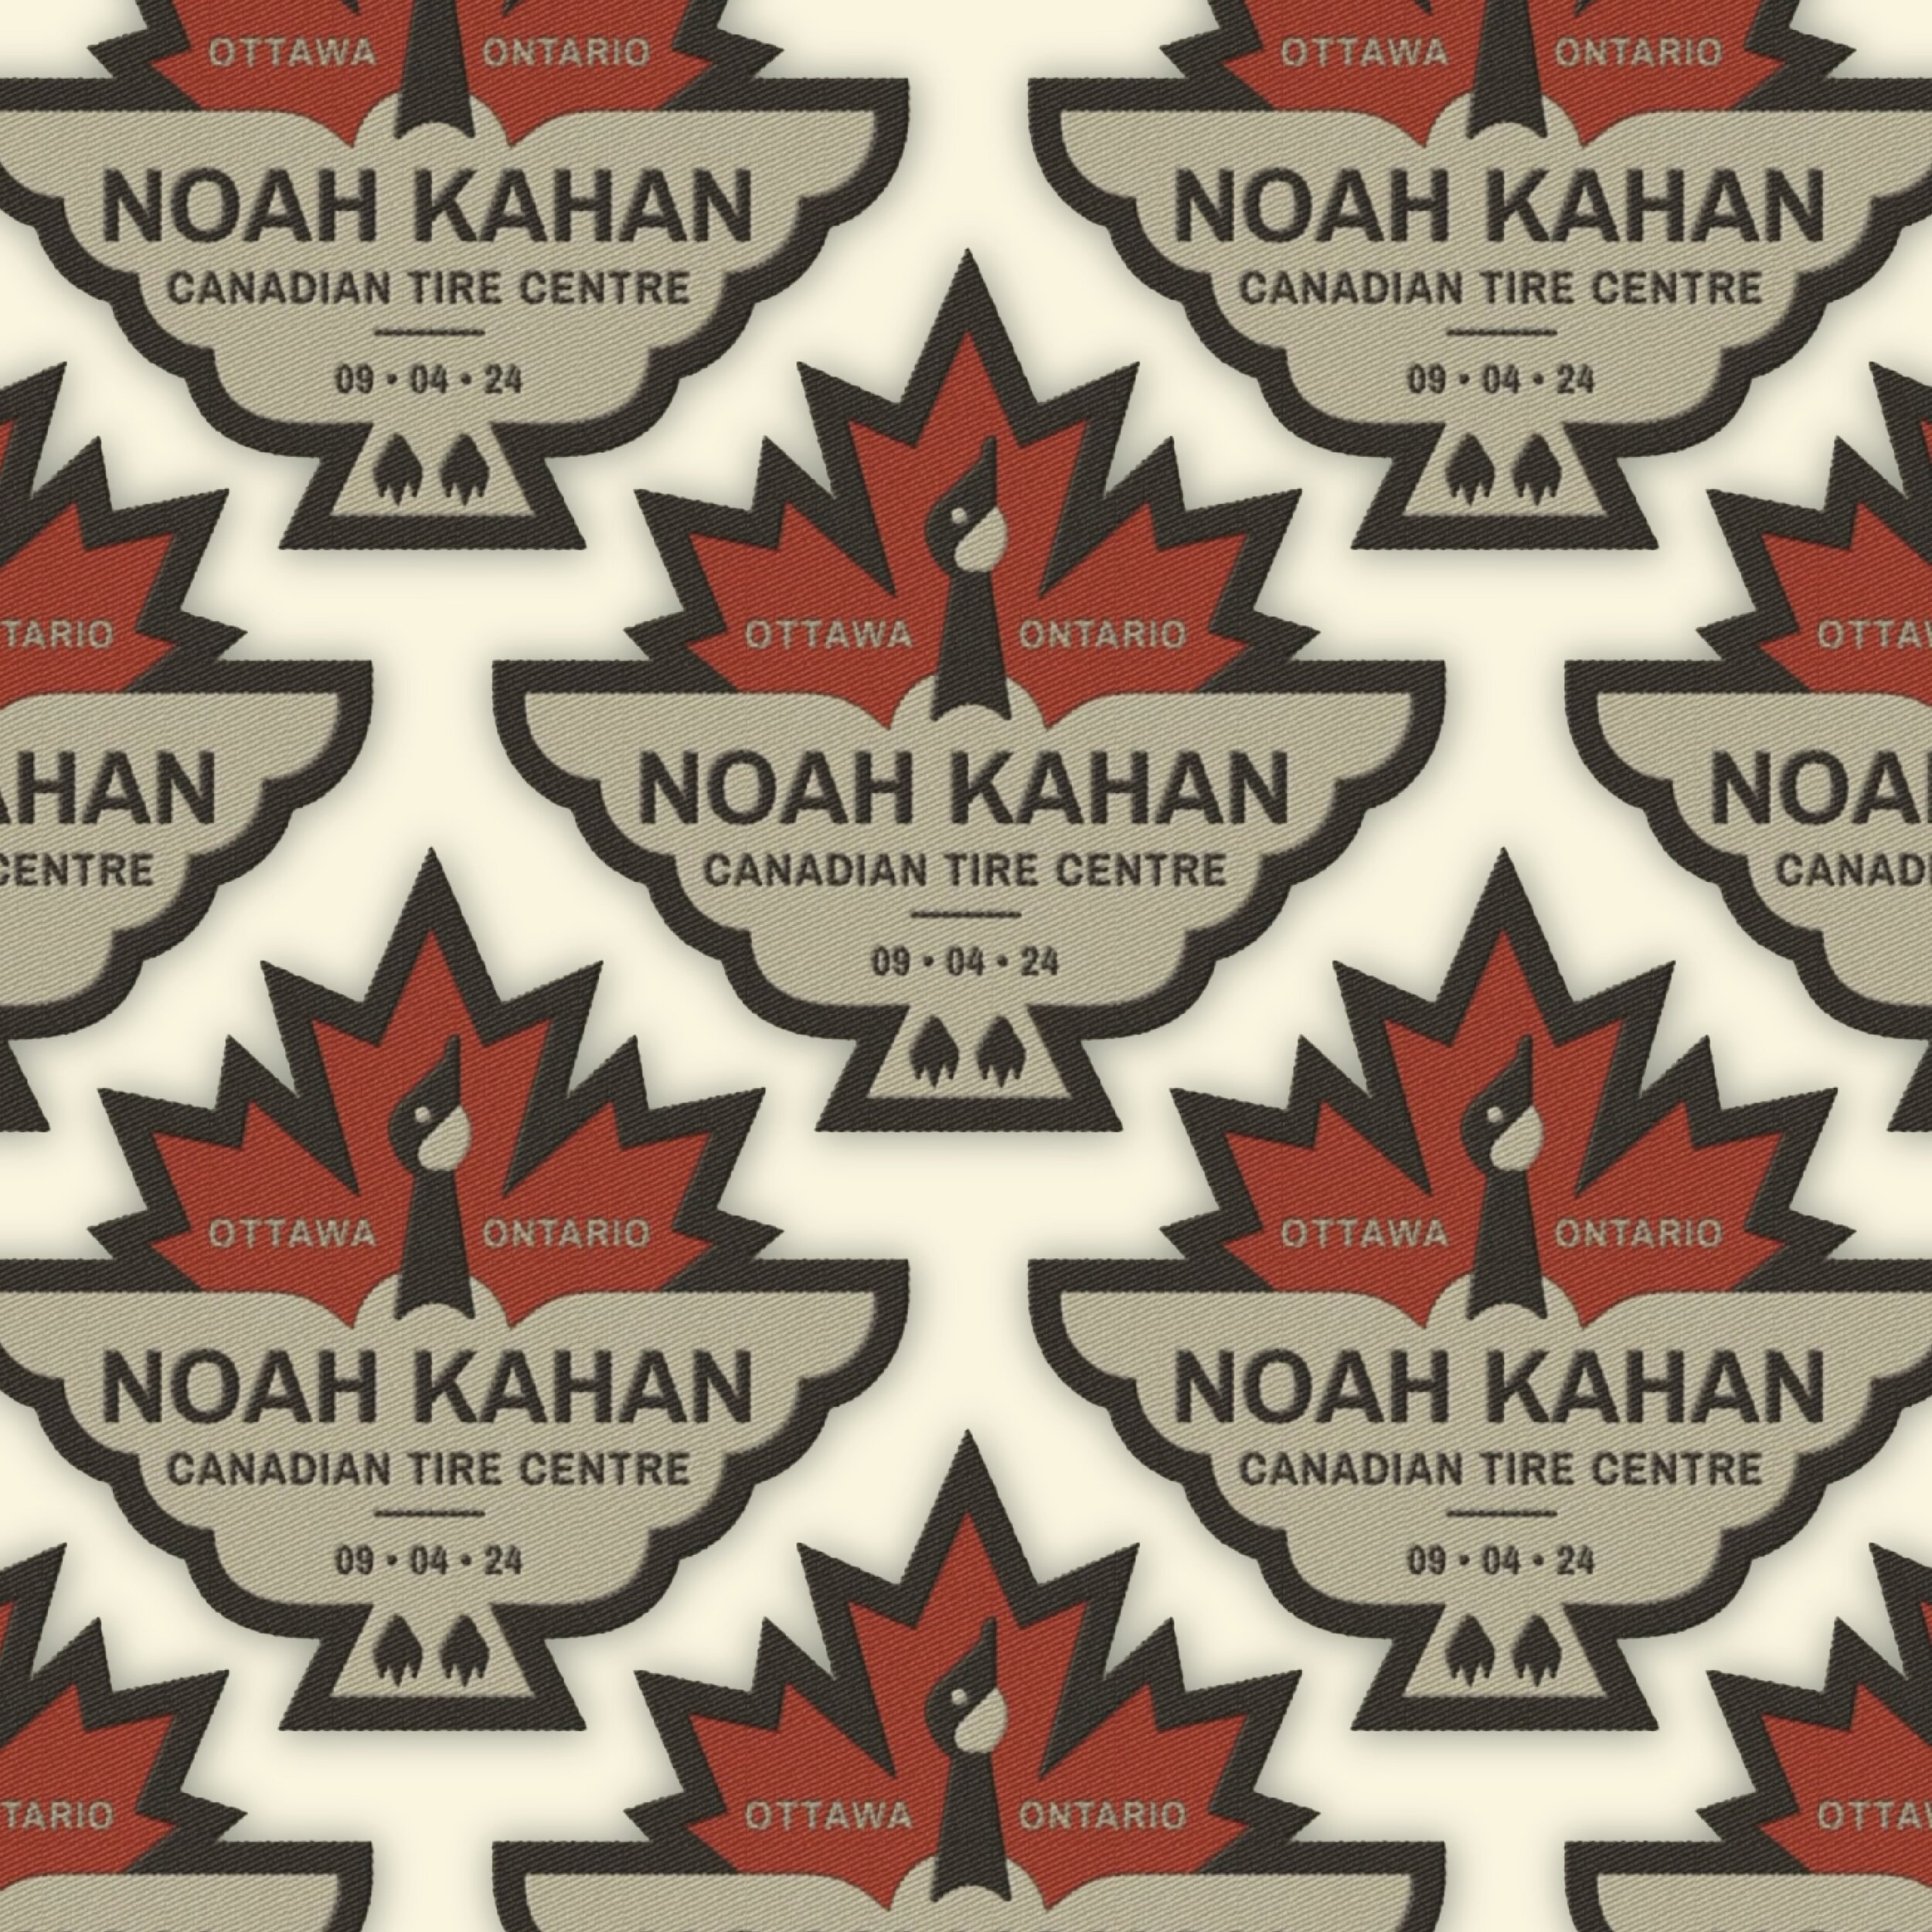 If you&rsquo;re fortunate to have gotten a ticket to Grammy nominee mega talent @noahkahanmusic &lsquo;s world tour, you know how coveted these little patches are for each city he plays in. The fact that they rallied artists from across the globe to 